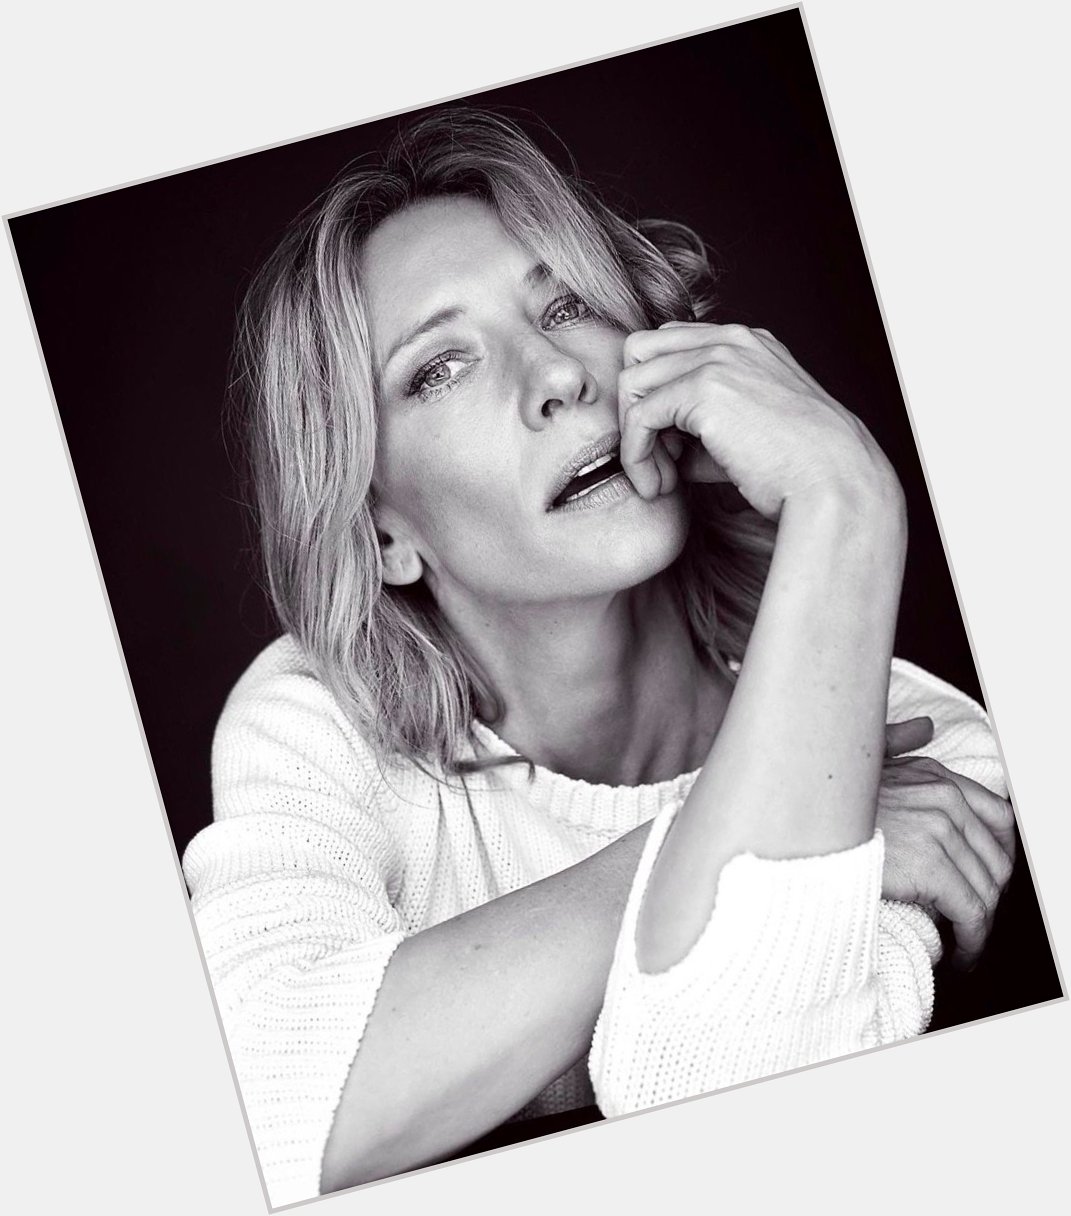    HAPPY BIRTHDAY to the one and only CATE BLANCHETT   